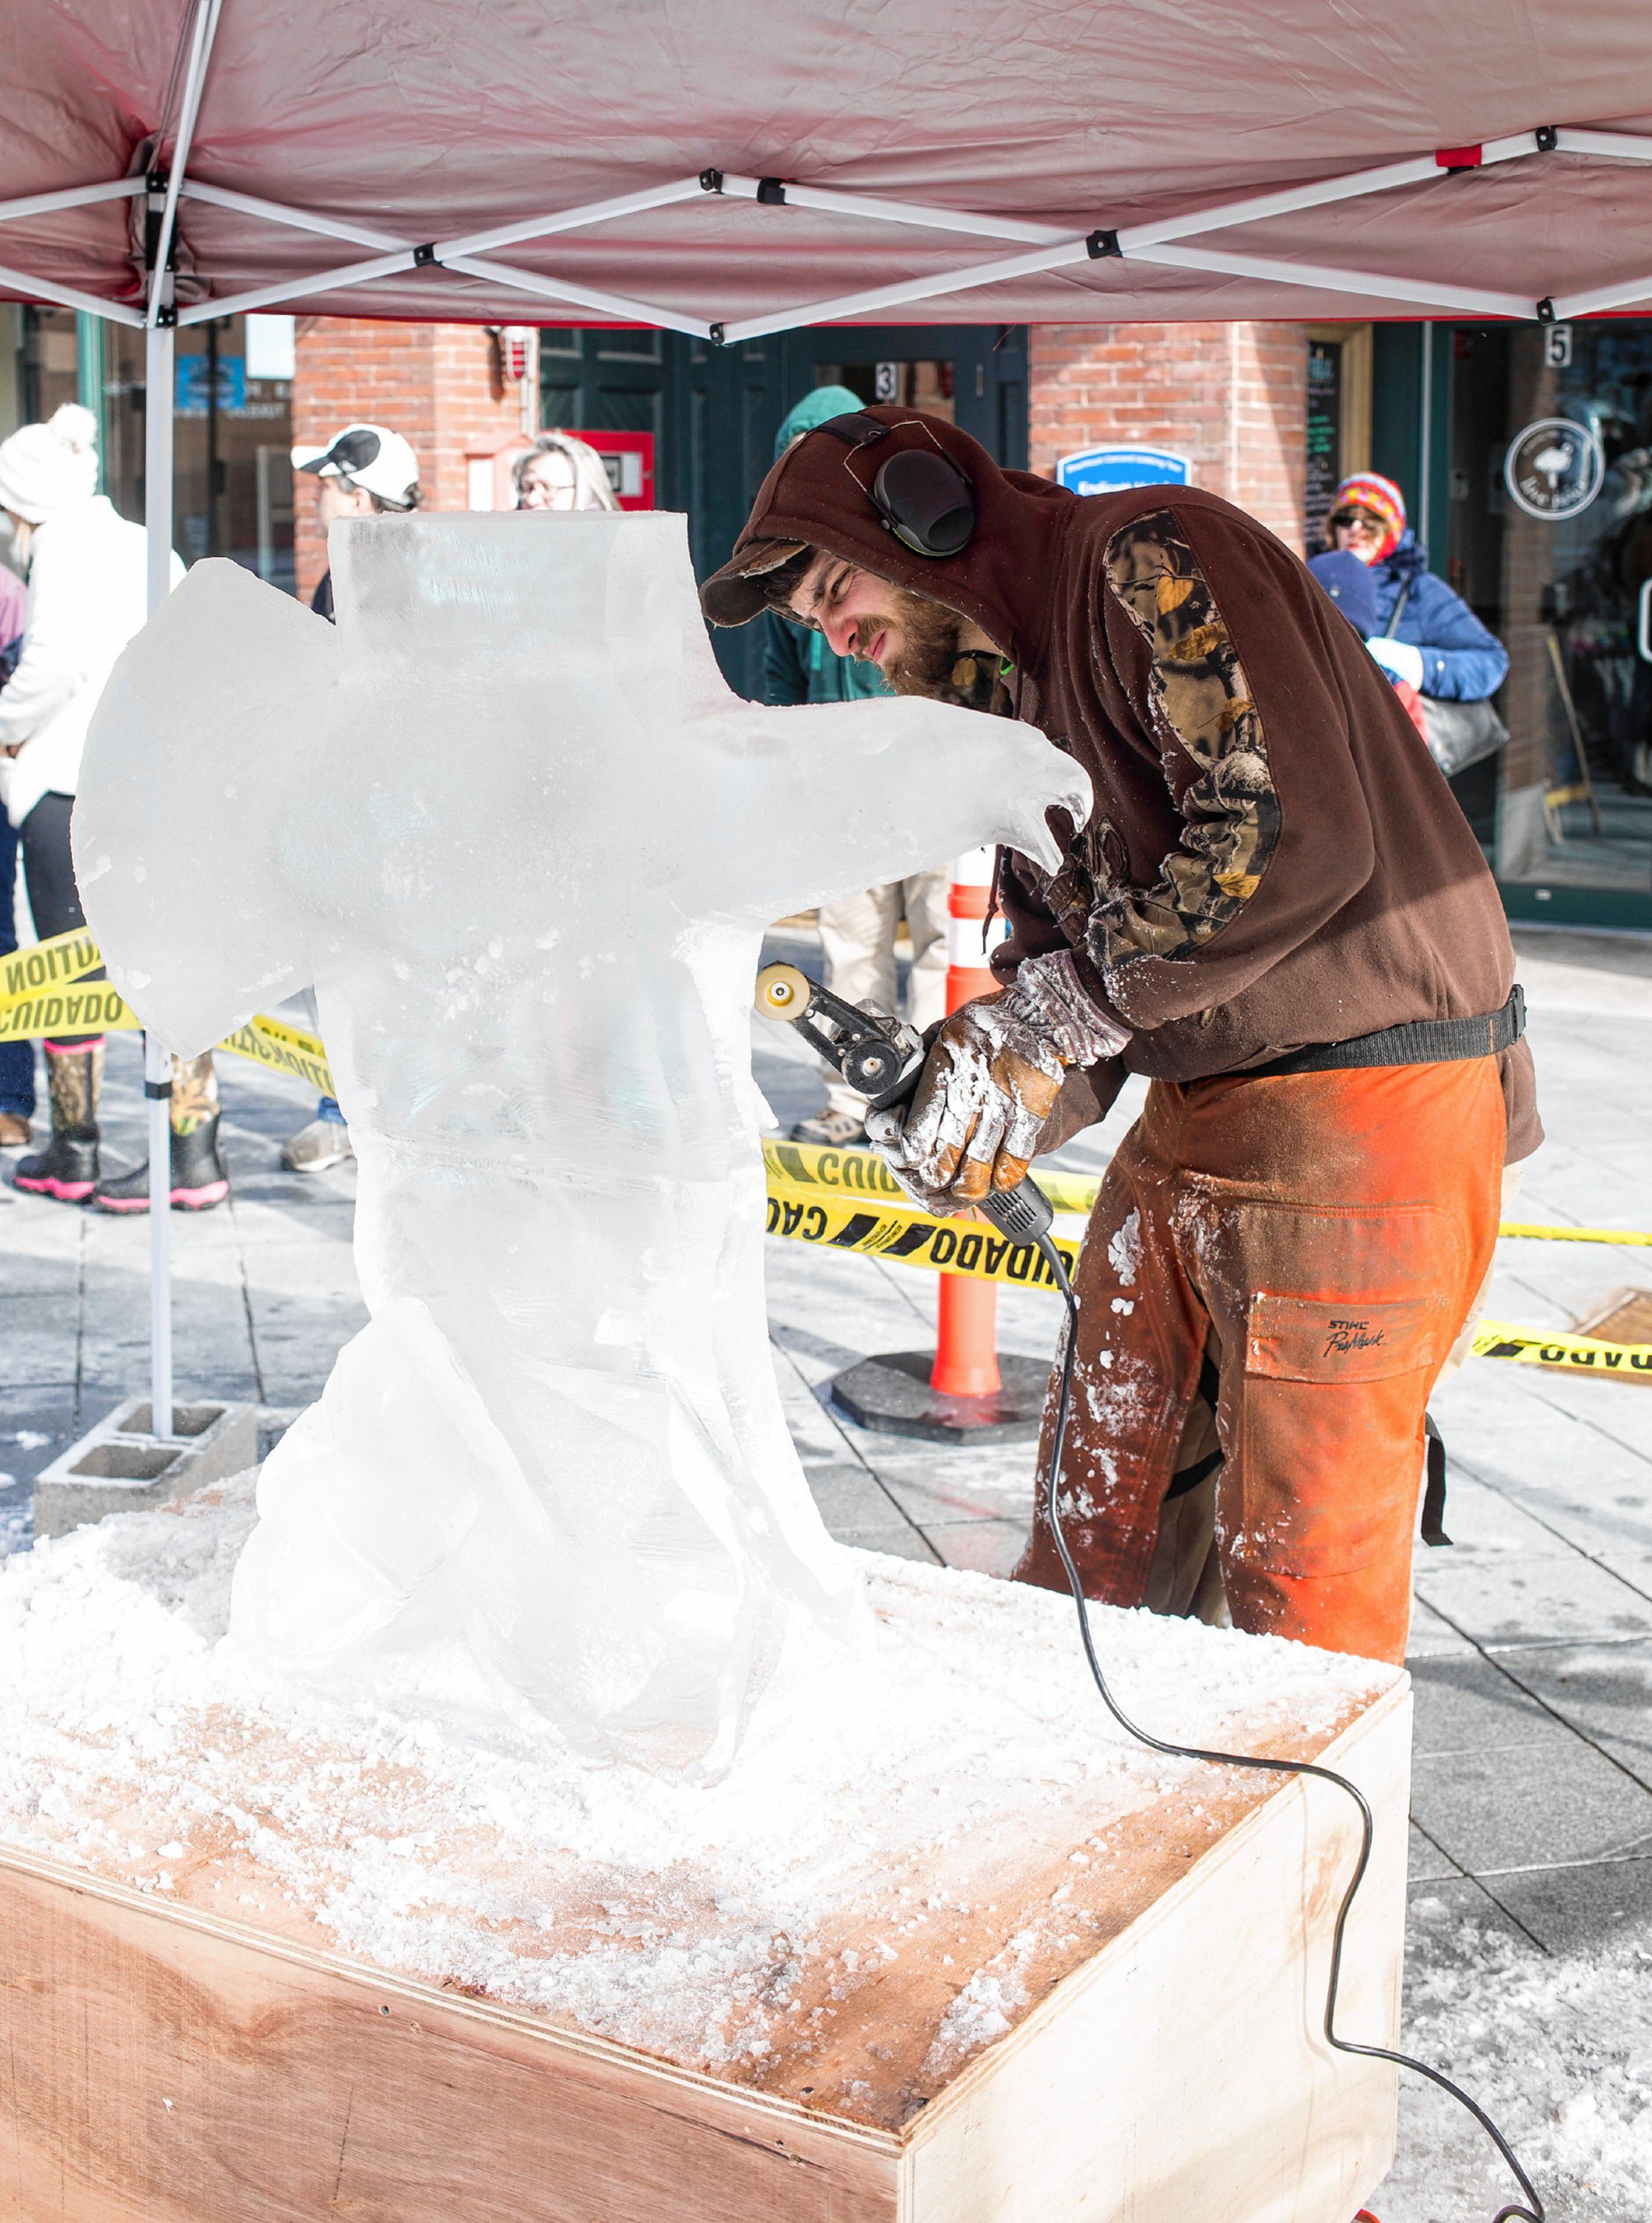 Michael Legassey of Athol, Mass., works on a bald eagle ice sculpture in downtown Concord on Saturday, January 26, 2019. "I mainly work with wood but ice has given me a chance to experiment in a different medium," Legassy said.  